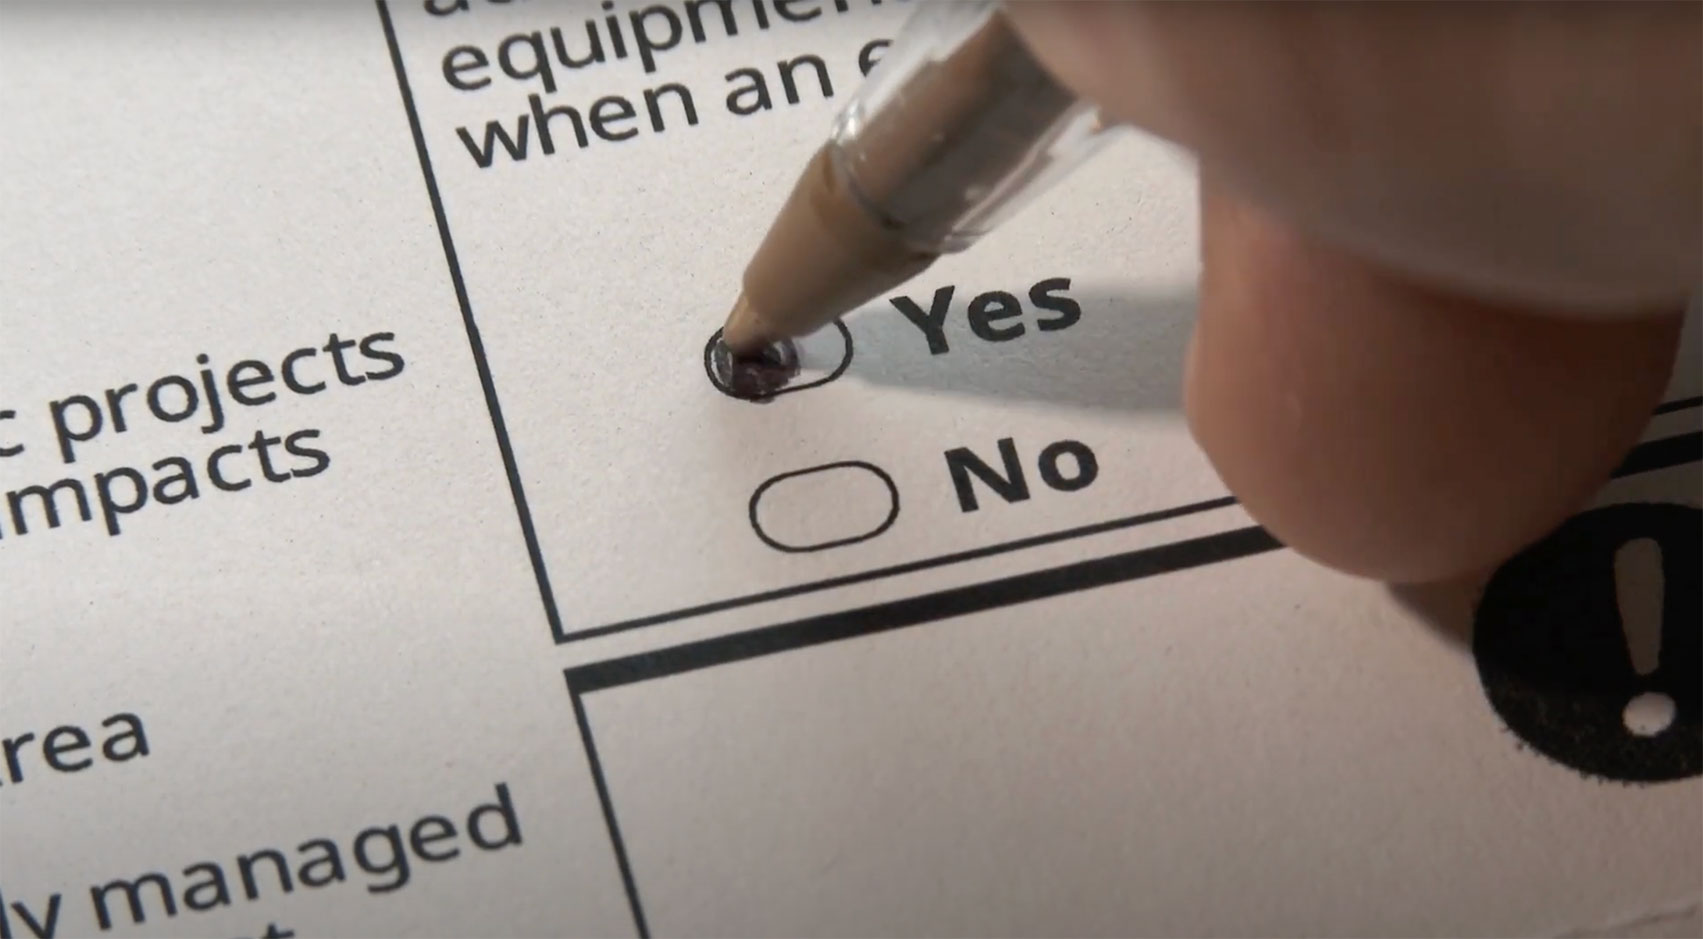 Will and irg action urge voters to vote yes on august 13  referendum questions